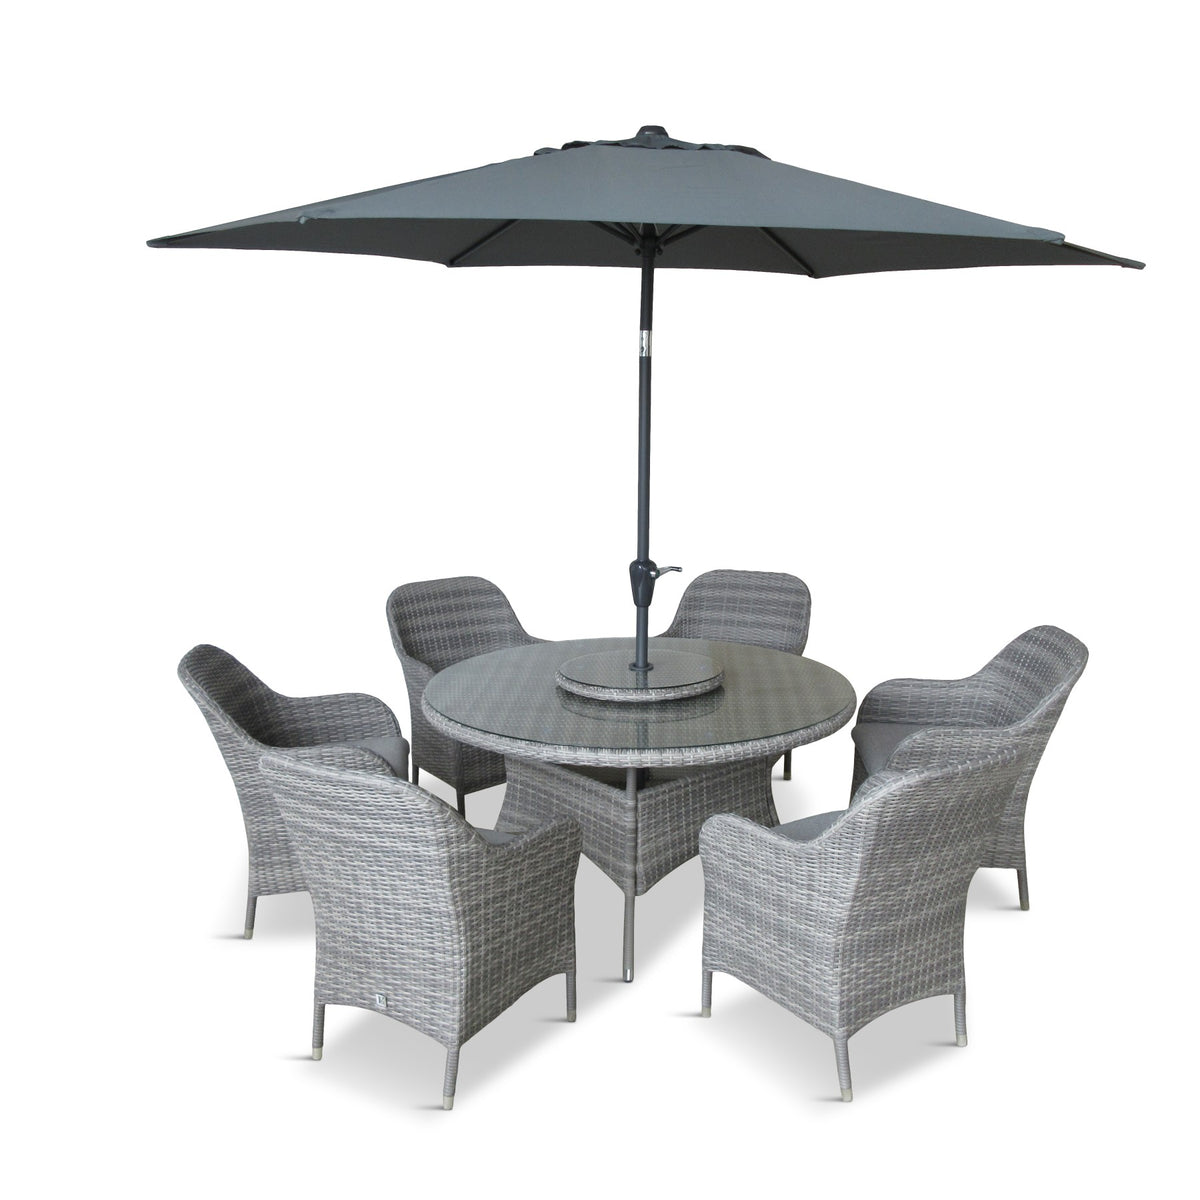 LG Outdoor Monte Carlo Stone Rattan Weave 6 Seat Garden Furniture Dining Set with Lazy Susan